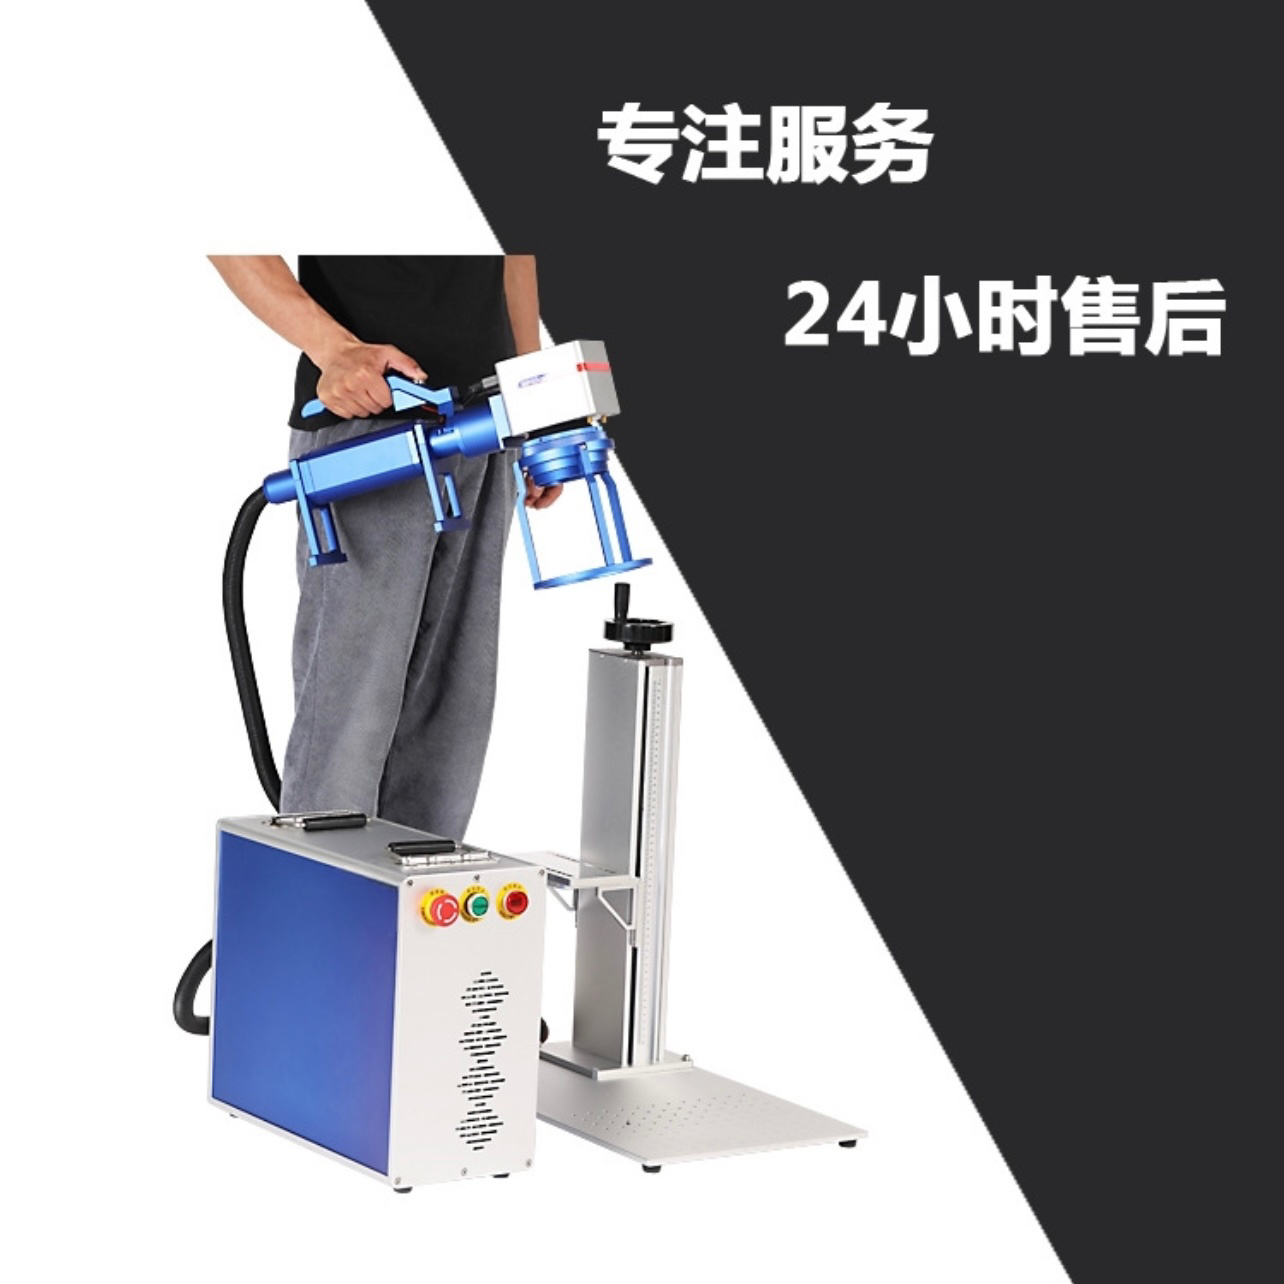 8W end pump handheld laser marking machine with stable performance, fast marking speed, simple operation, lightweight, portable Haoxiang